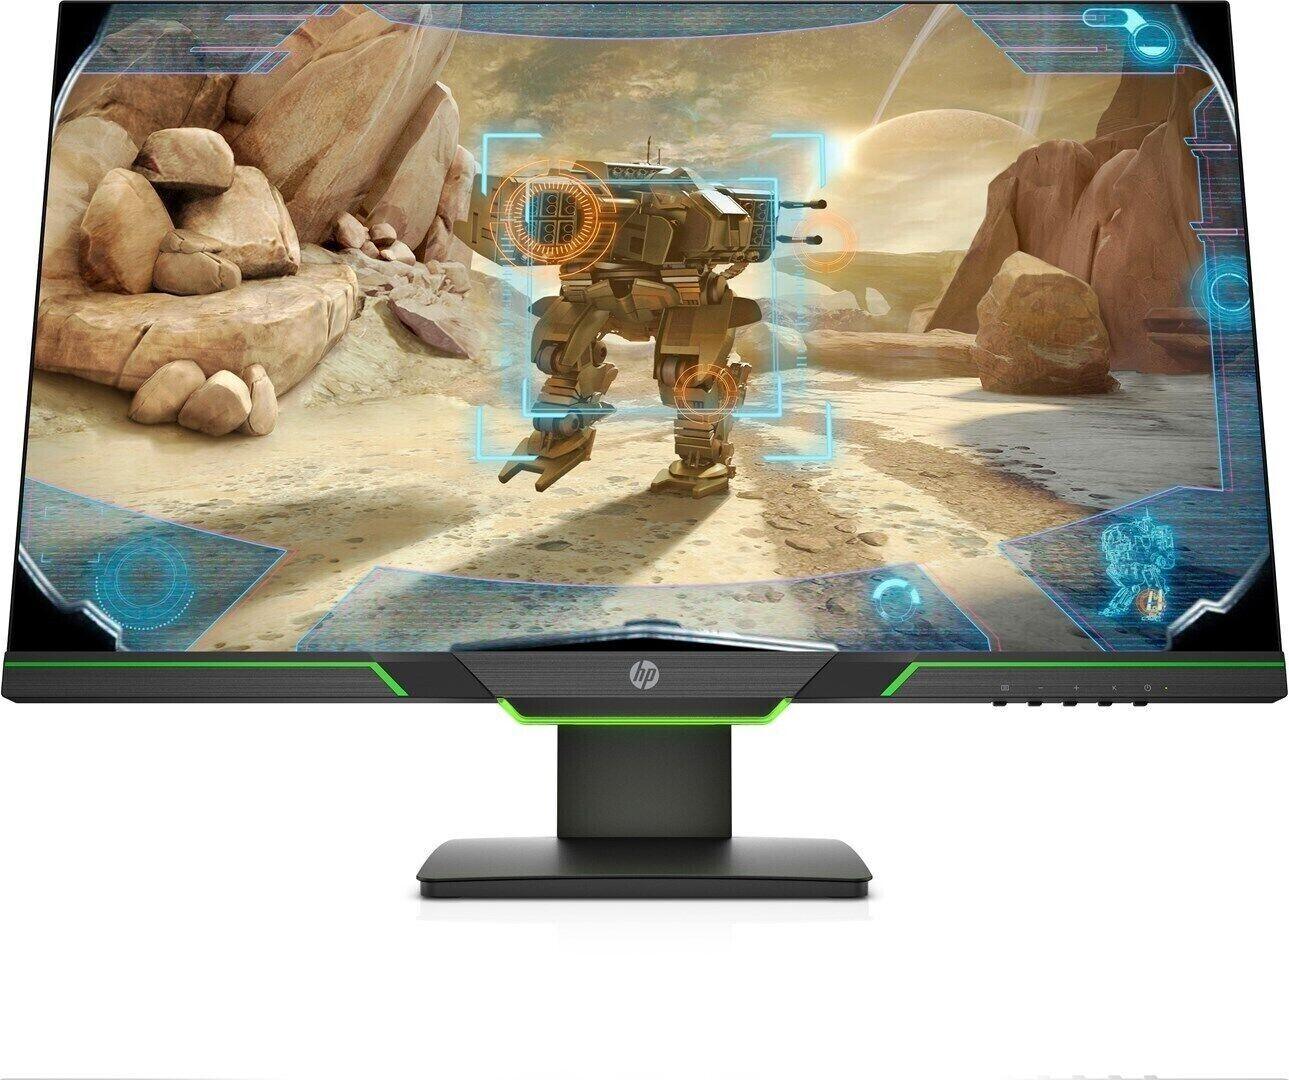 HP 27xq 144 Hz Quad HD Gaming Monitor NO STAND - Smart Clear Vision